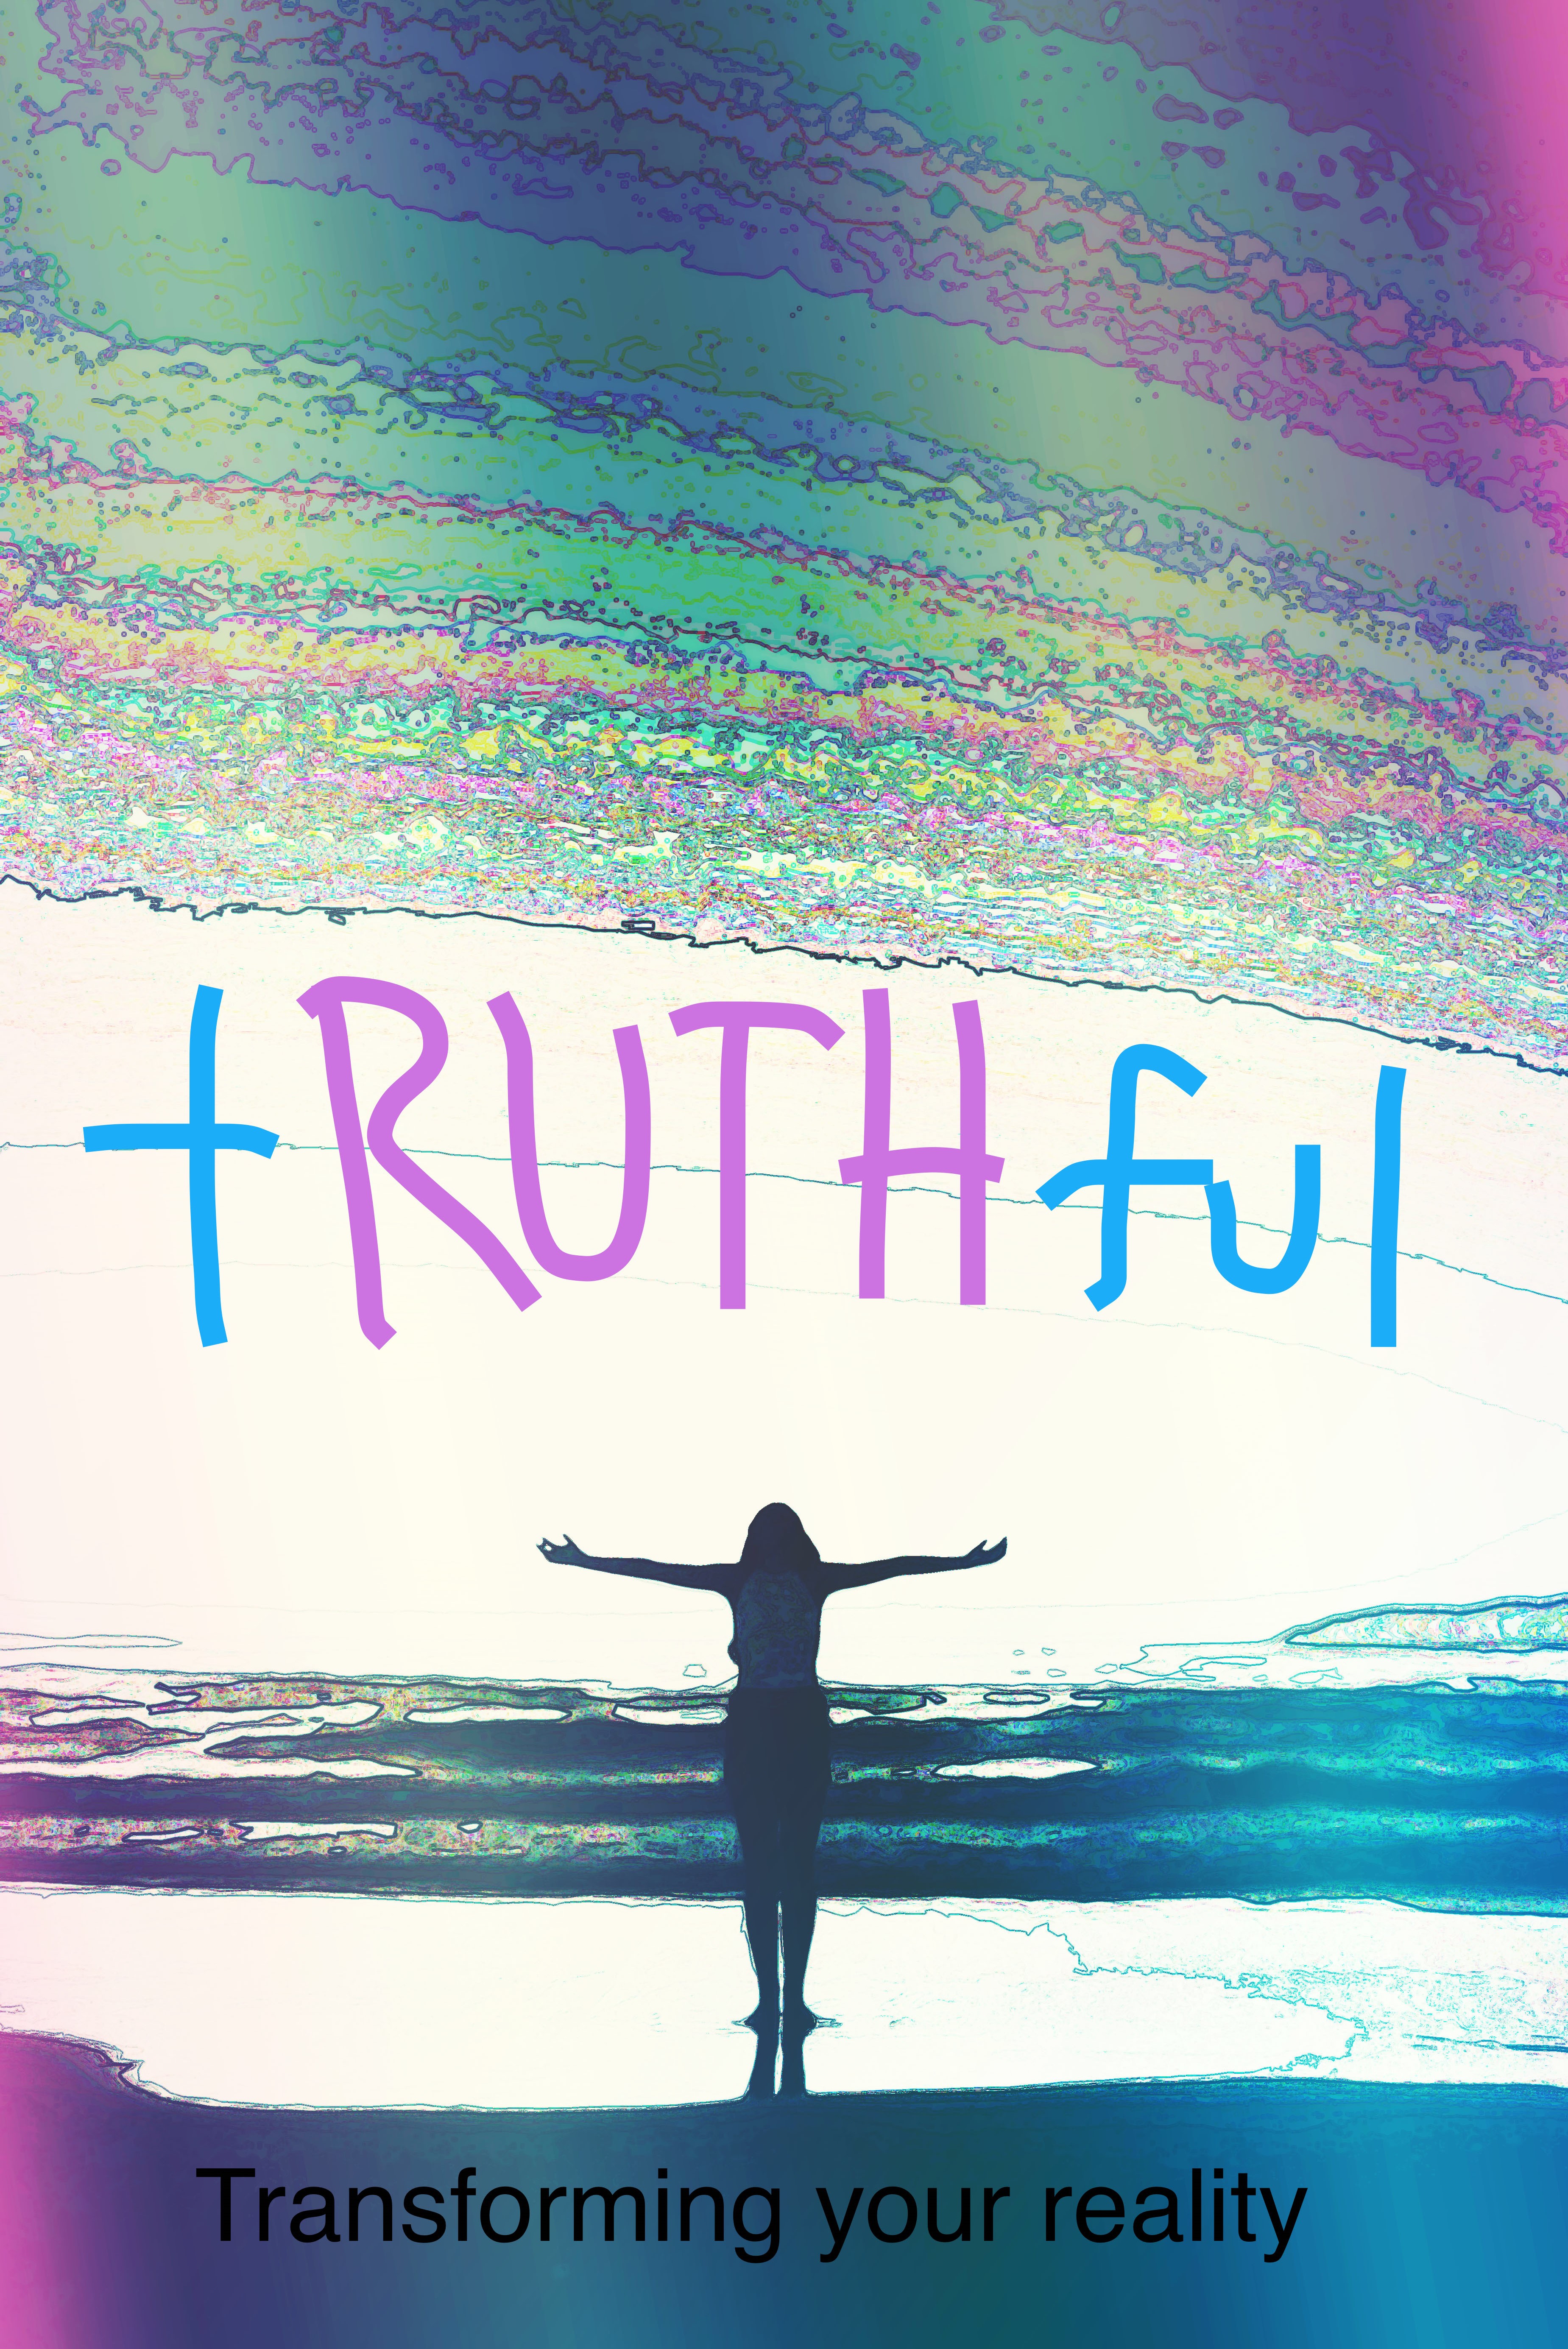 tRUTHful:transforming your reality